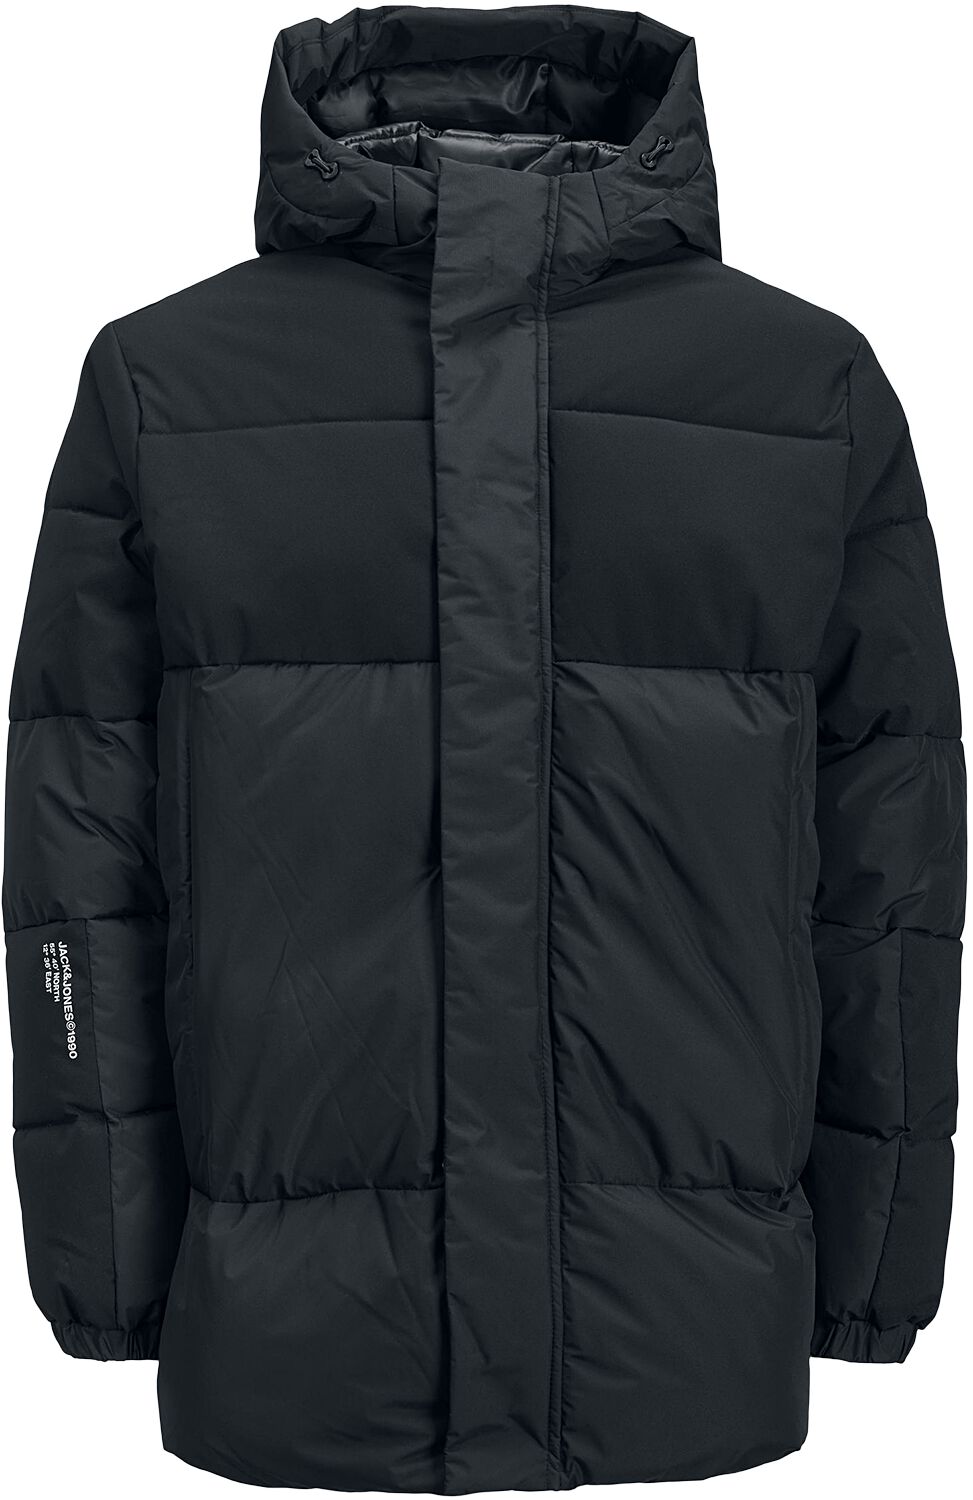 Image of Giacca invernale di Jack & Jones - Force puffer - S a XL - Uomo - nero